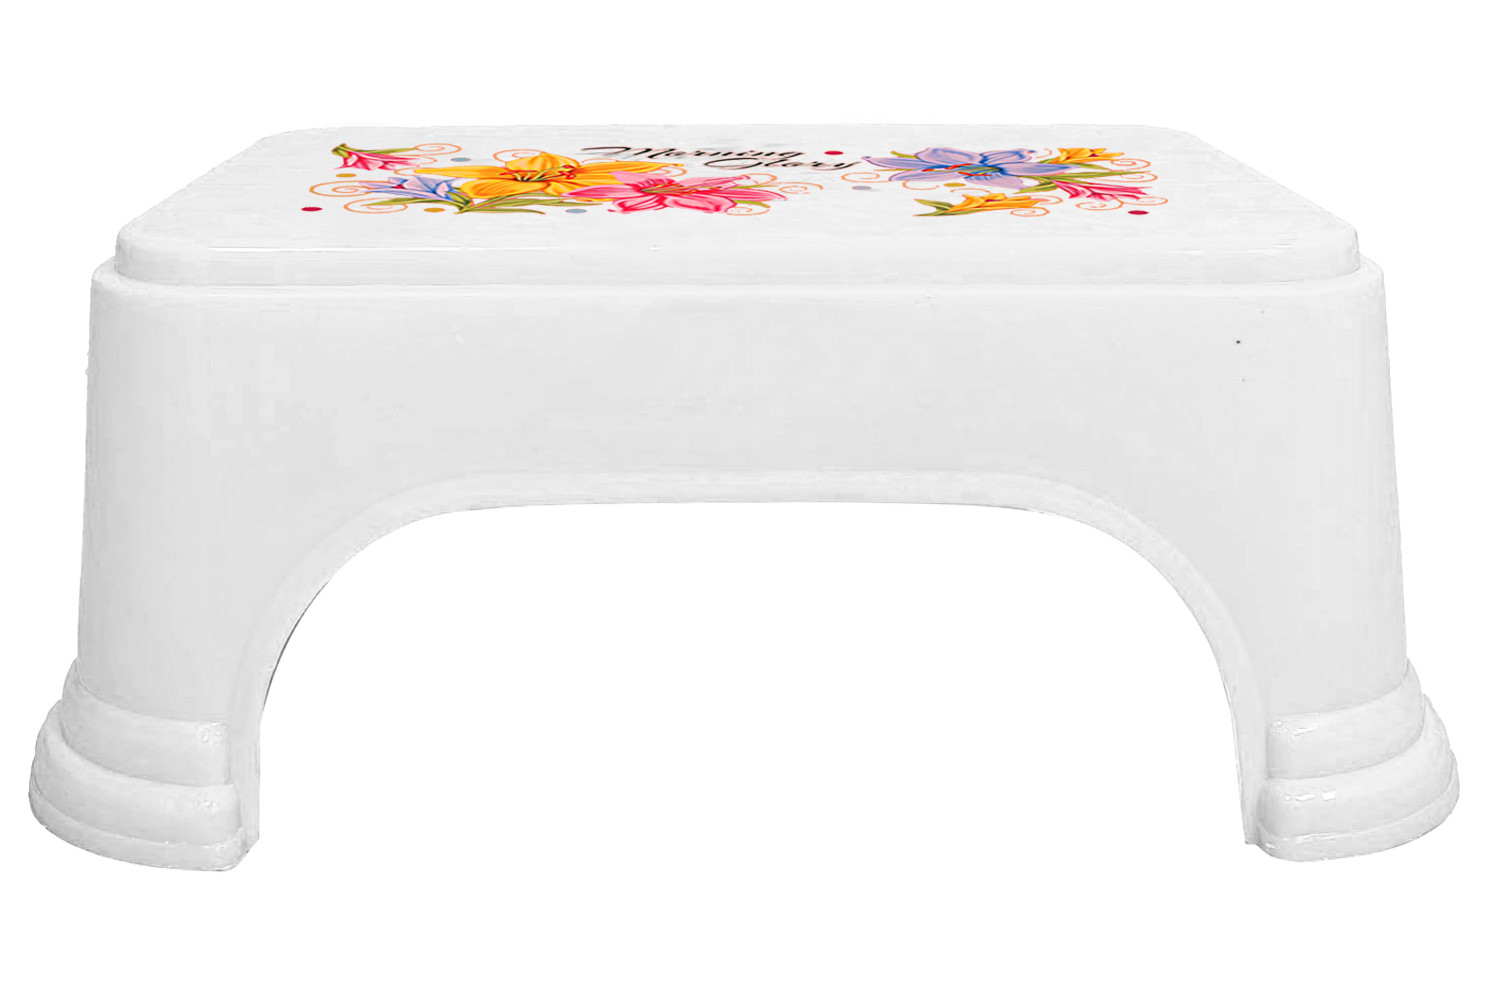 Kuber Industries Floral Print Plastic Bathroom Stool, Adults Simple Style Stool Anti-Slip with Strong Bearing Stool for Home, Office, Kindergarten, White